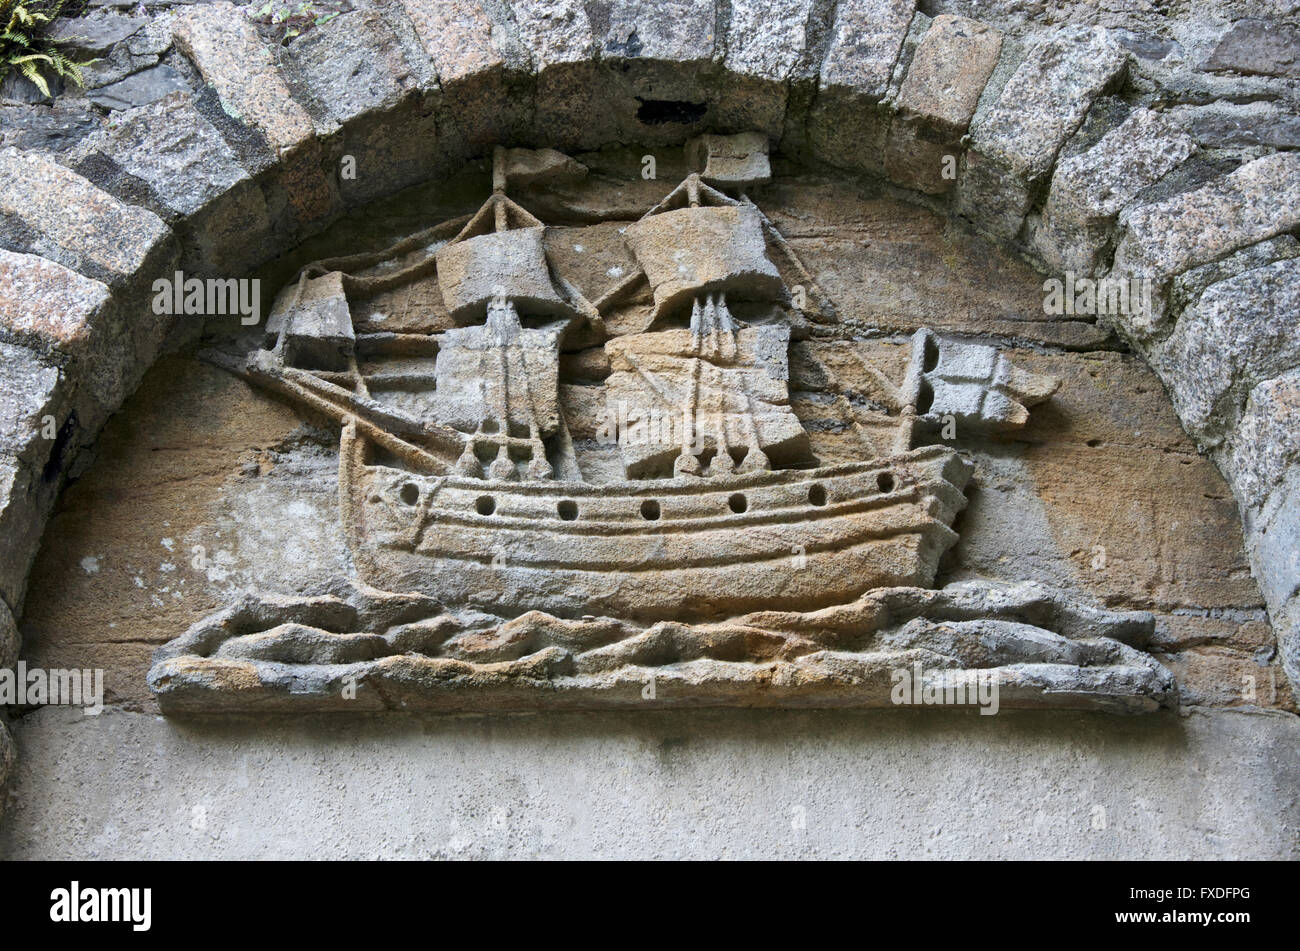 Wall carving of The Mayflower Ship in the Elizabethan Gardens, Plymouth. Stock Photo